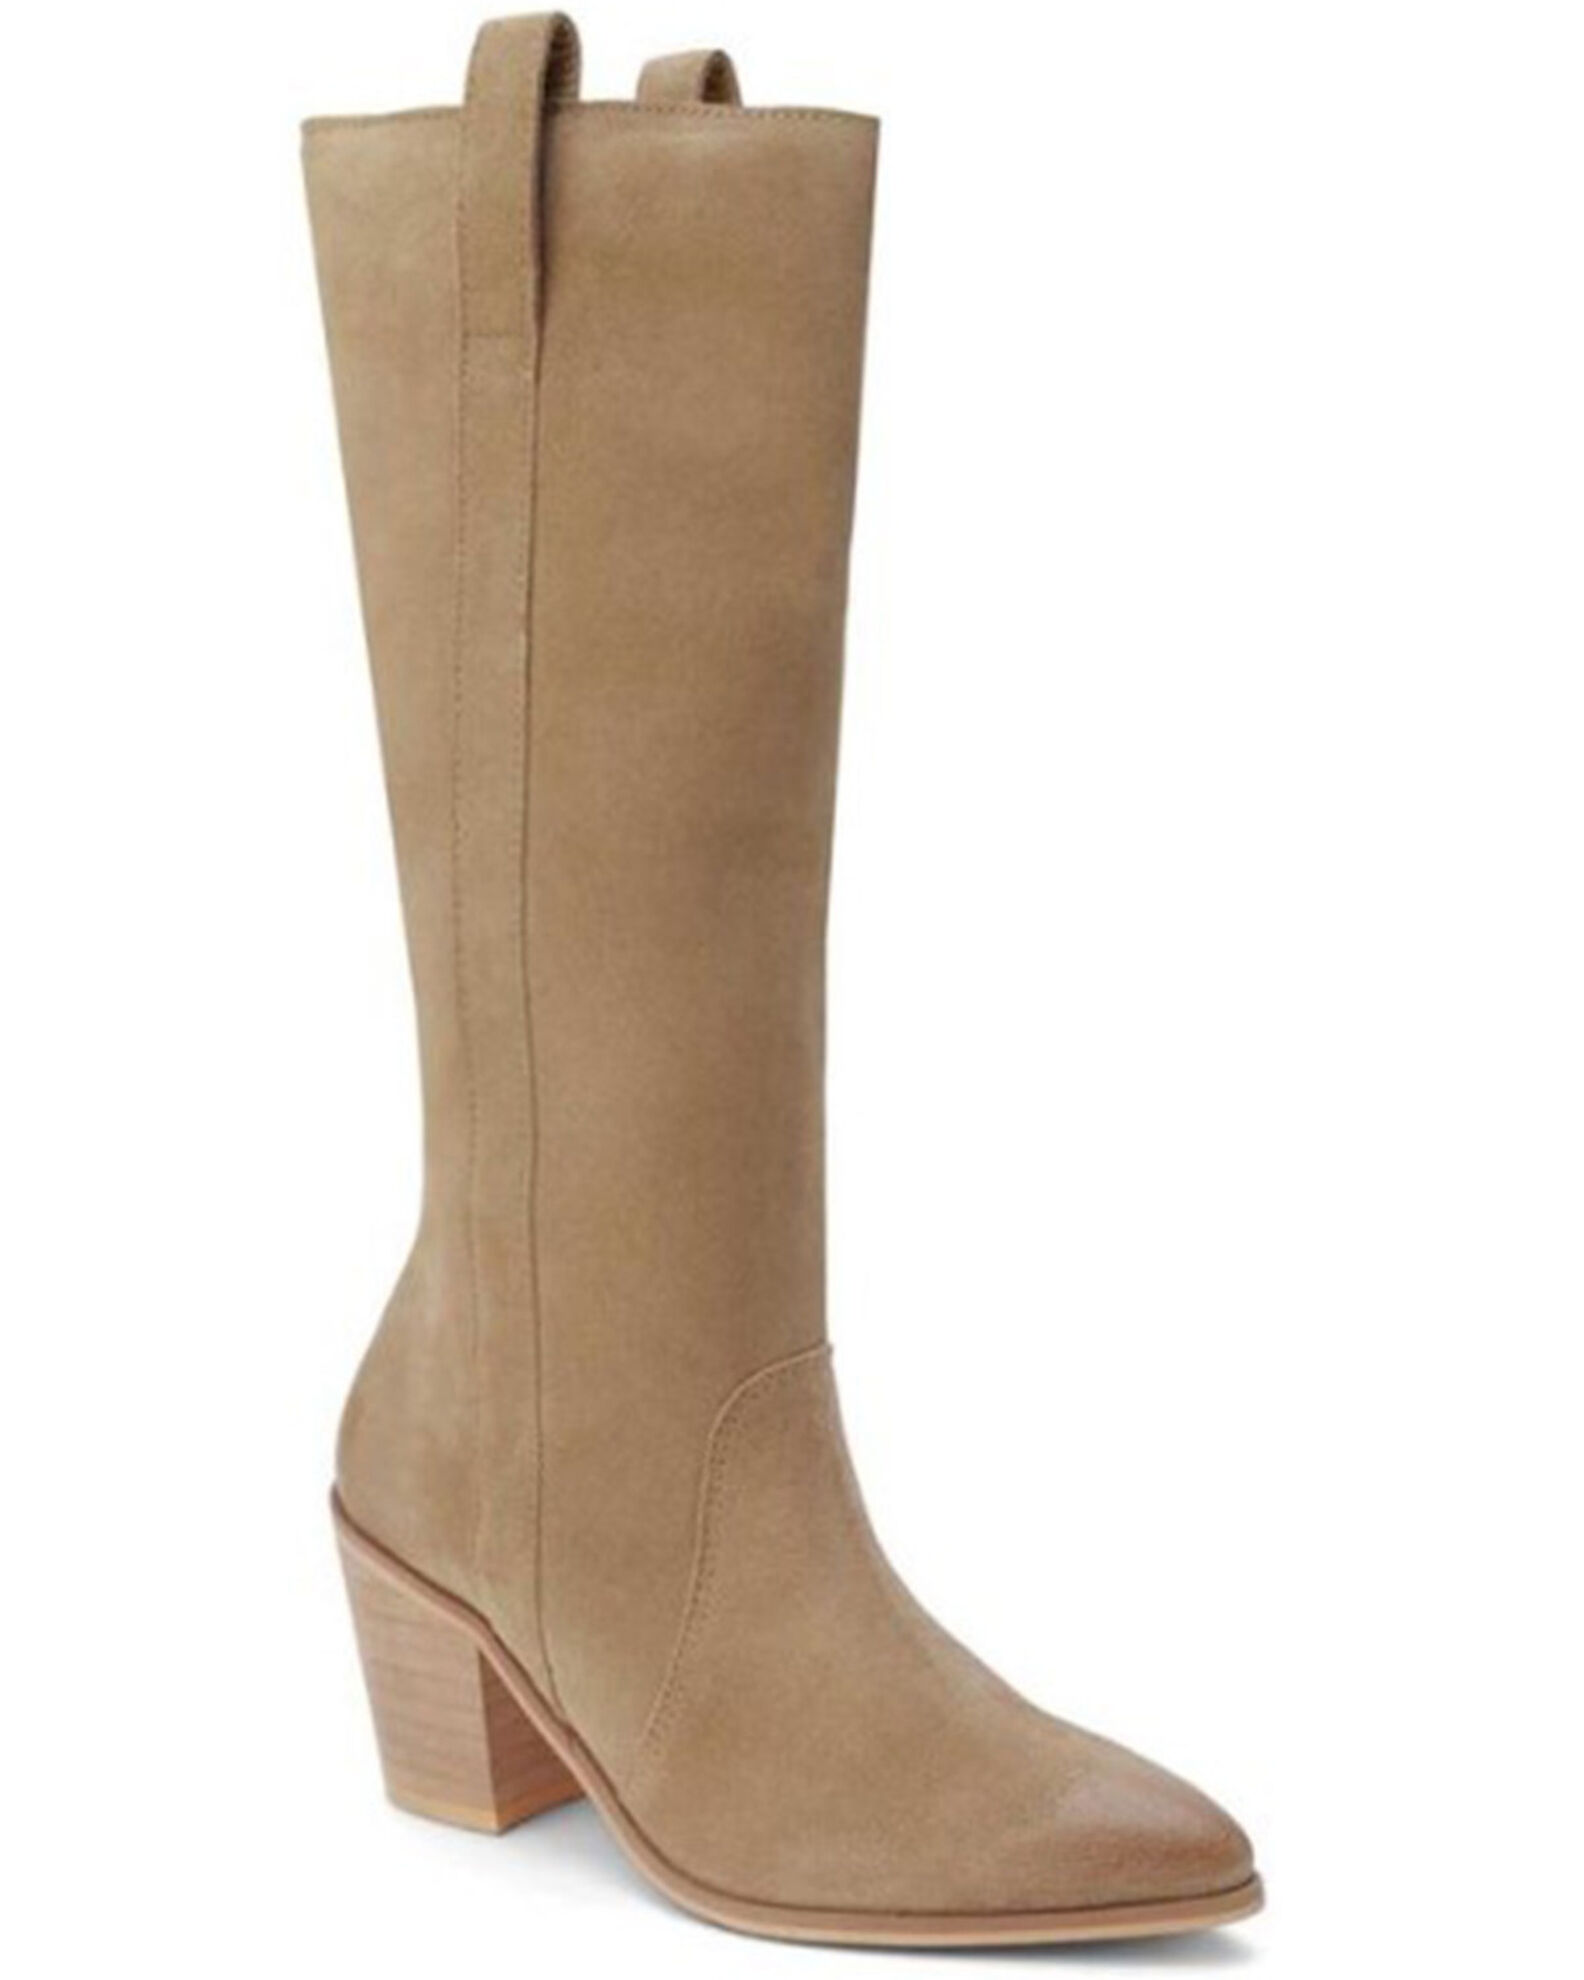 Product Name: Matisse Women's Evan Tall Western Boots - Pointed Toe